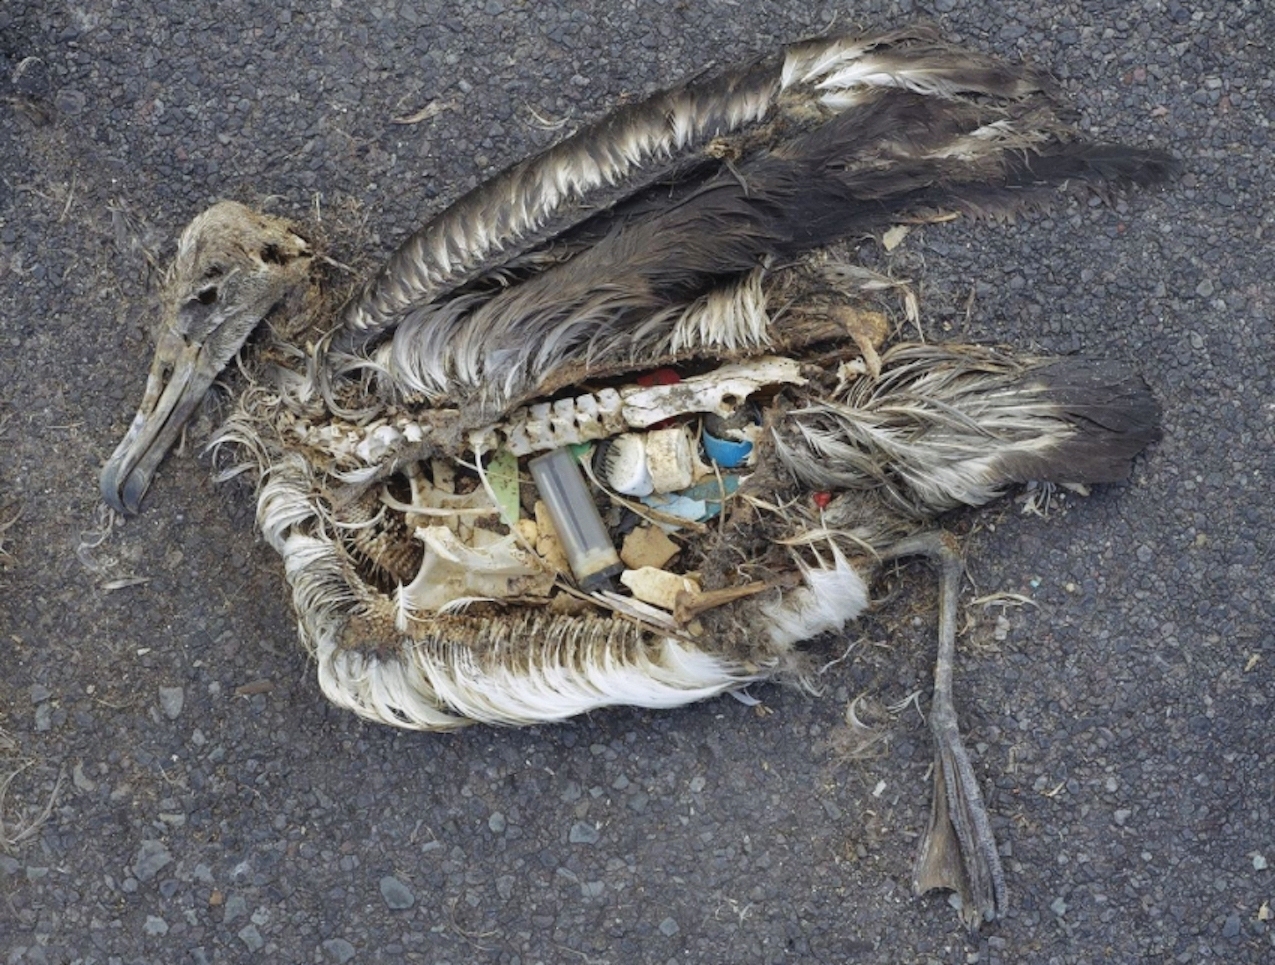 Albatross with plastic in its stomach